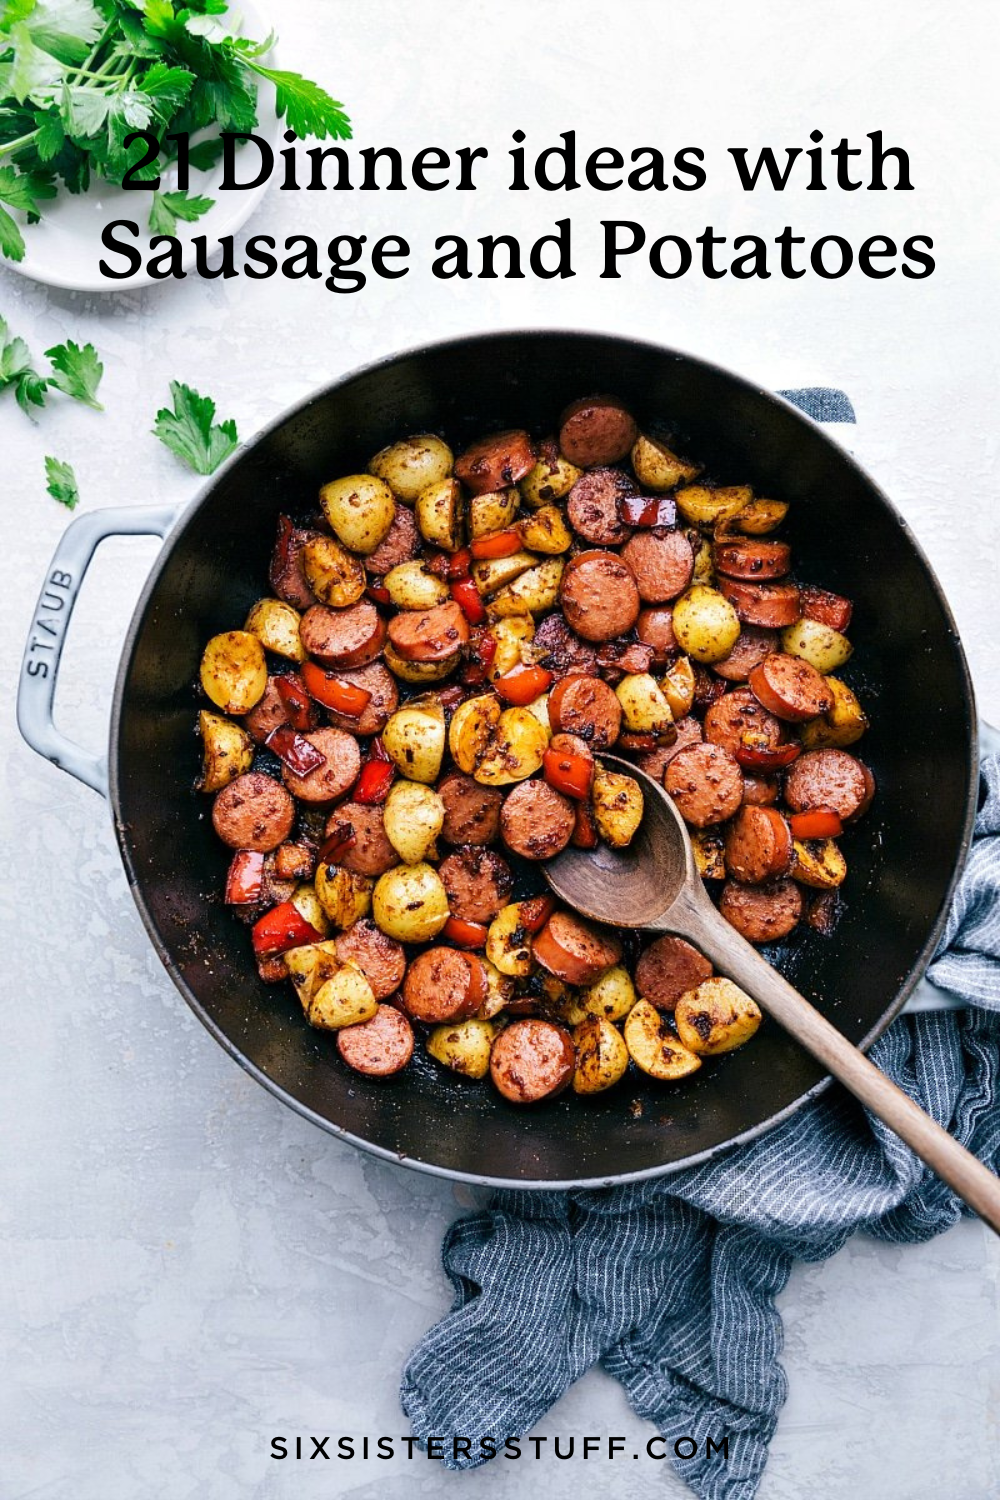 21 Dinner ideas with Sausage and Potatoes